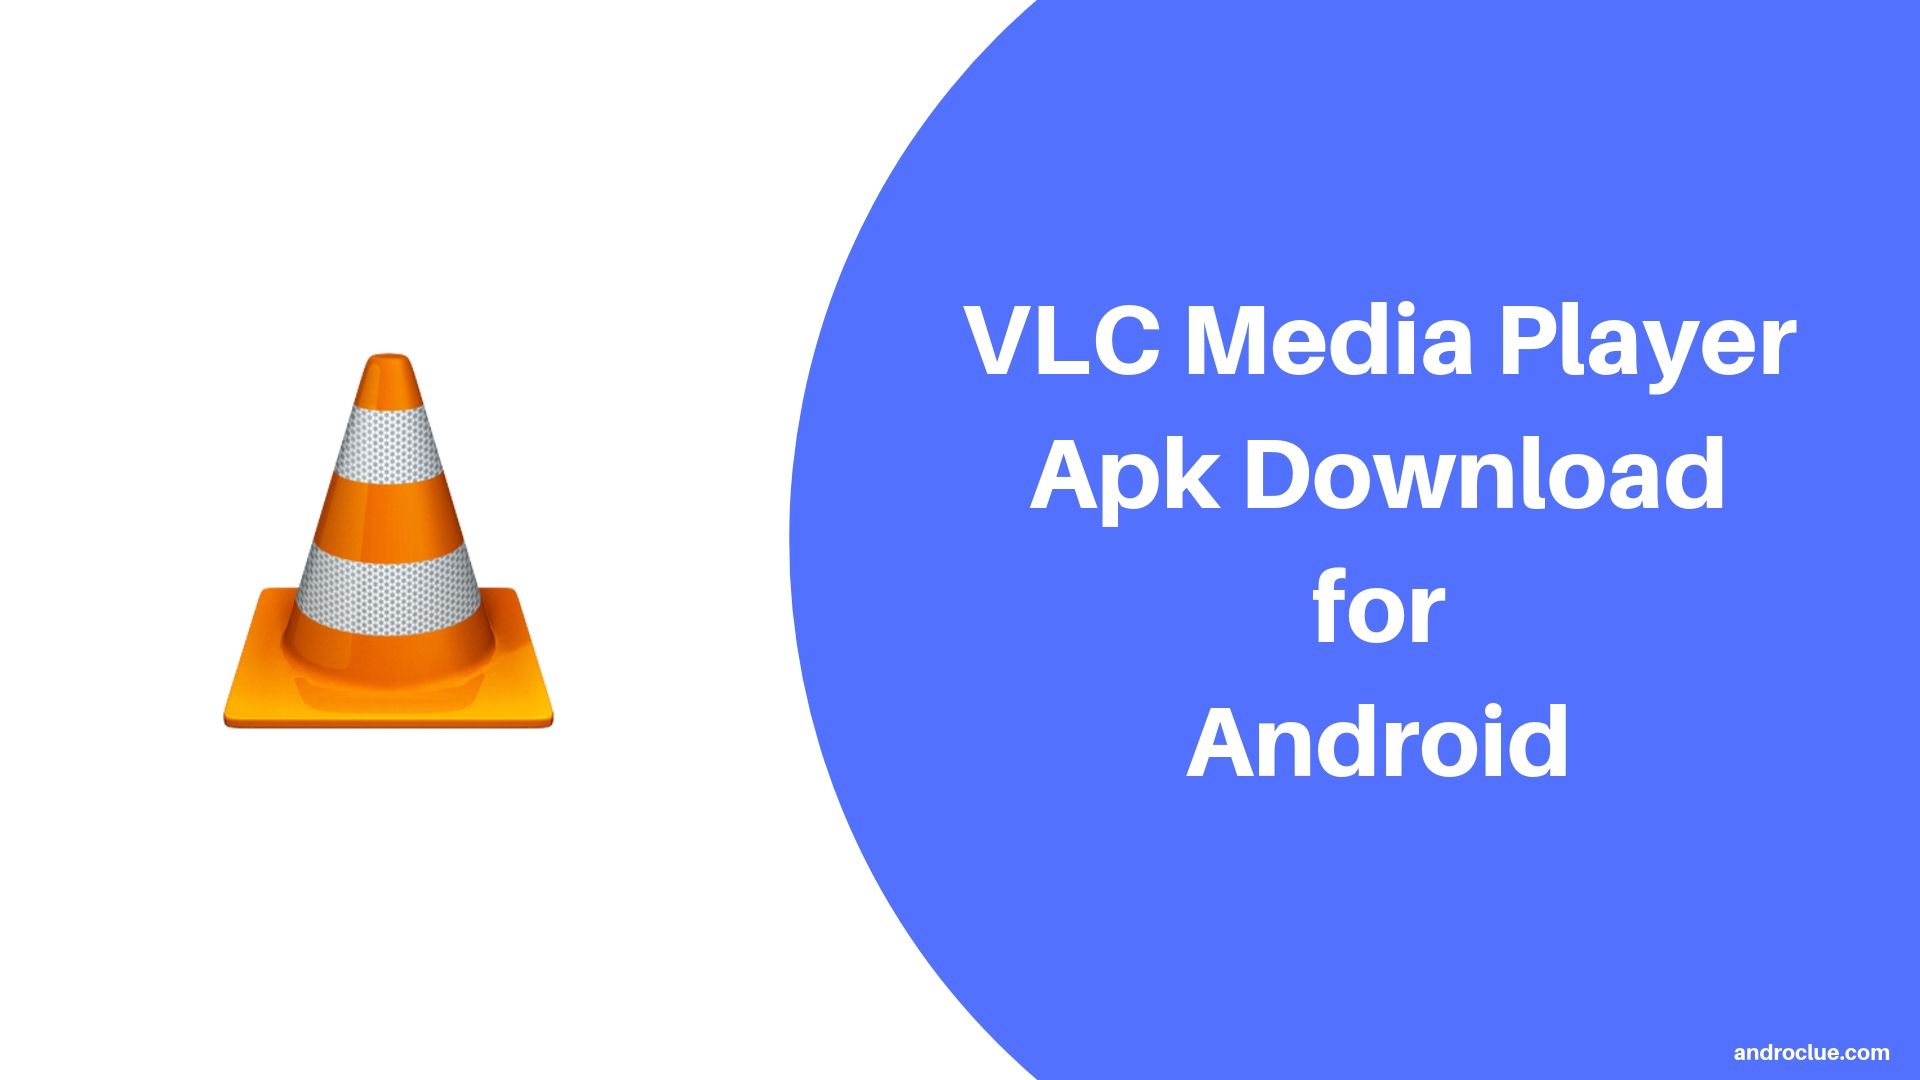 vlc media player is it any good at compressing video files